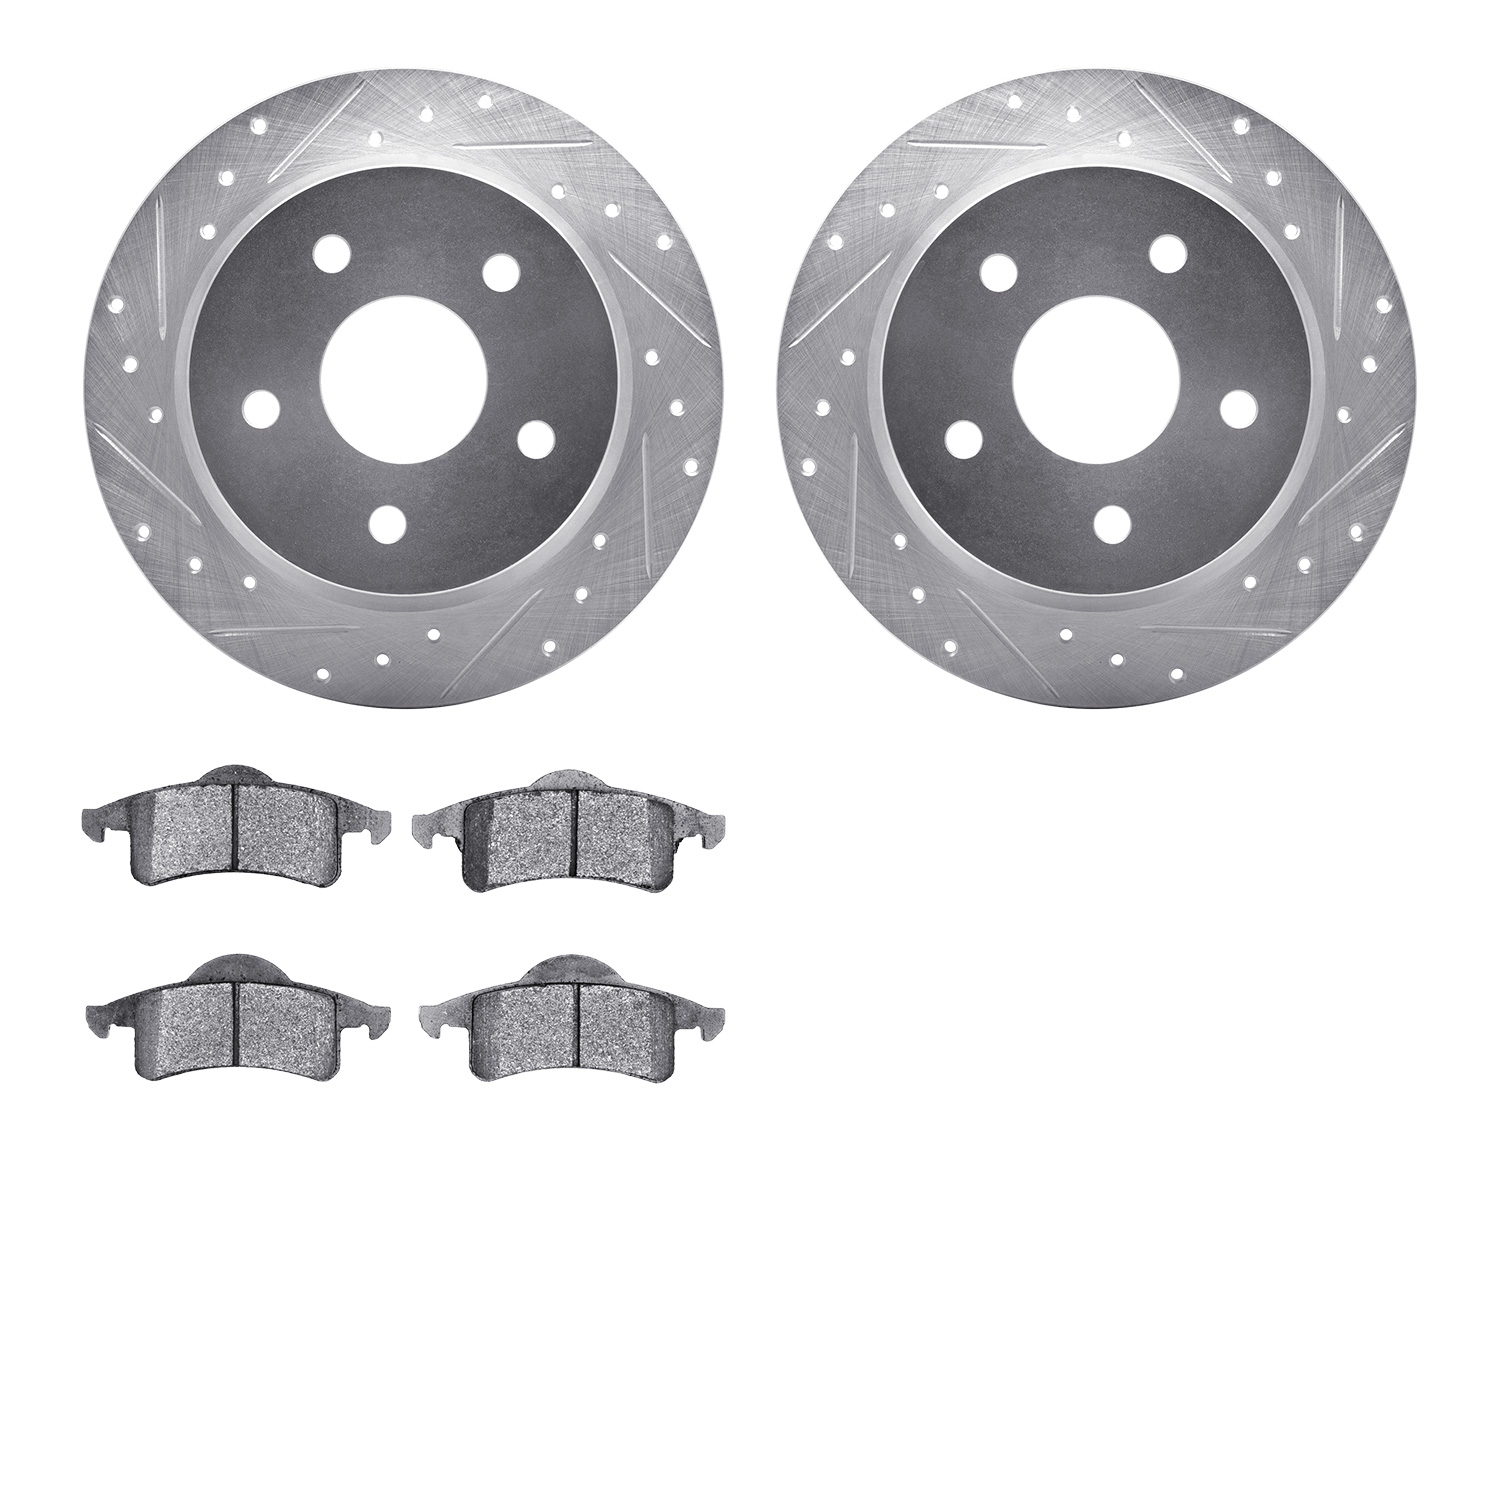 7402-42032 Drilled/Slotted Brake Rotors with Ultimate-Duty Brake Pads Kit [Silver], 1999-2004 Mopar, Position: Rear